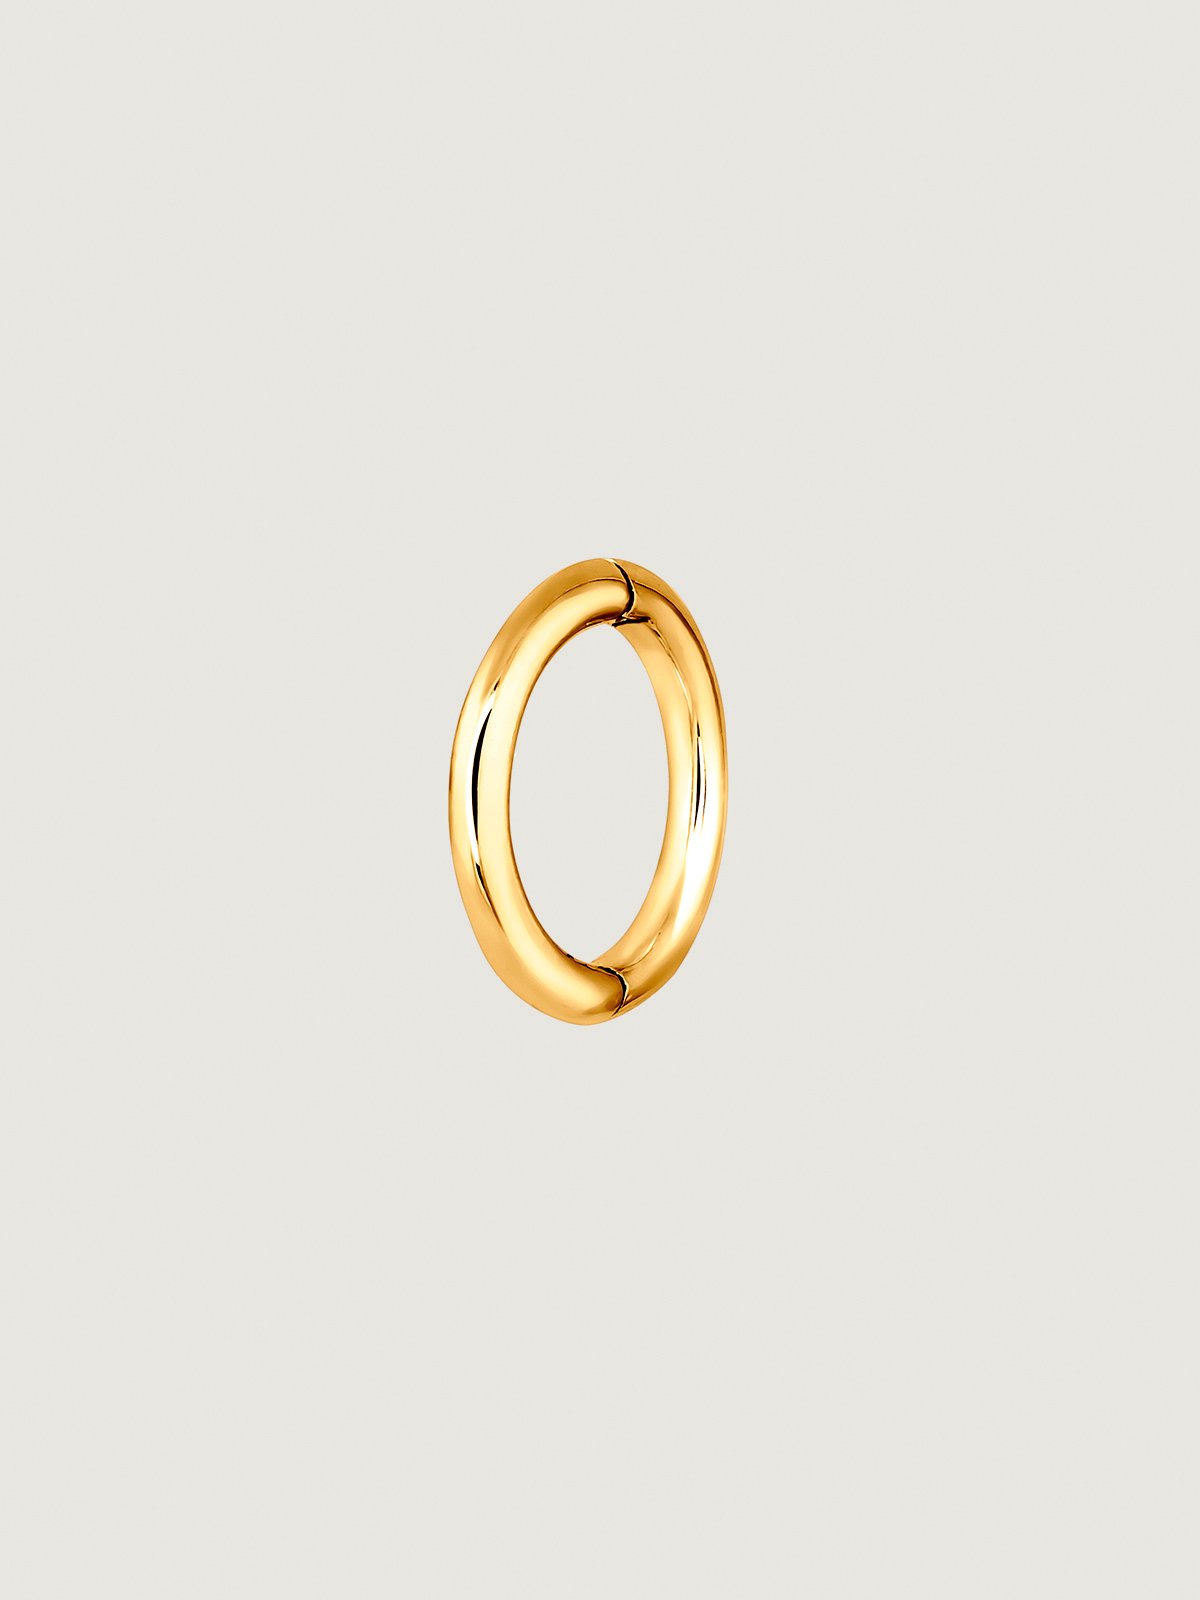 Small individual 9K yellow gold hoop earring.